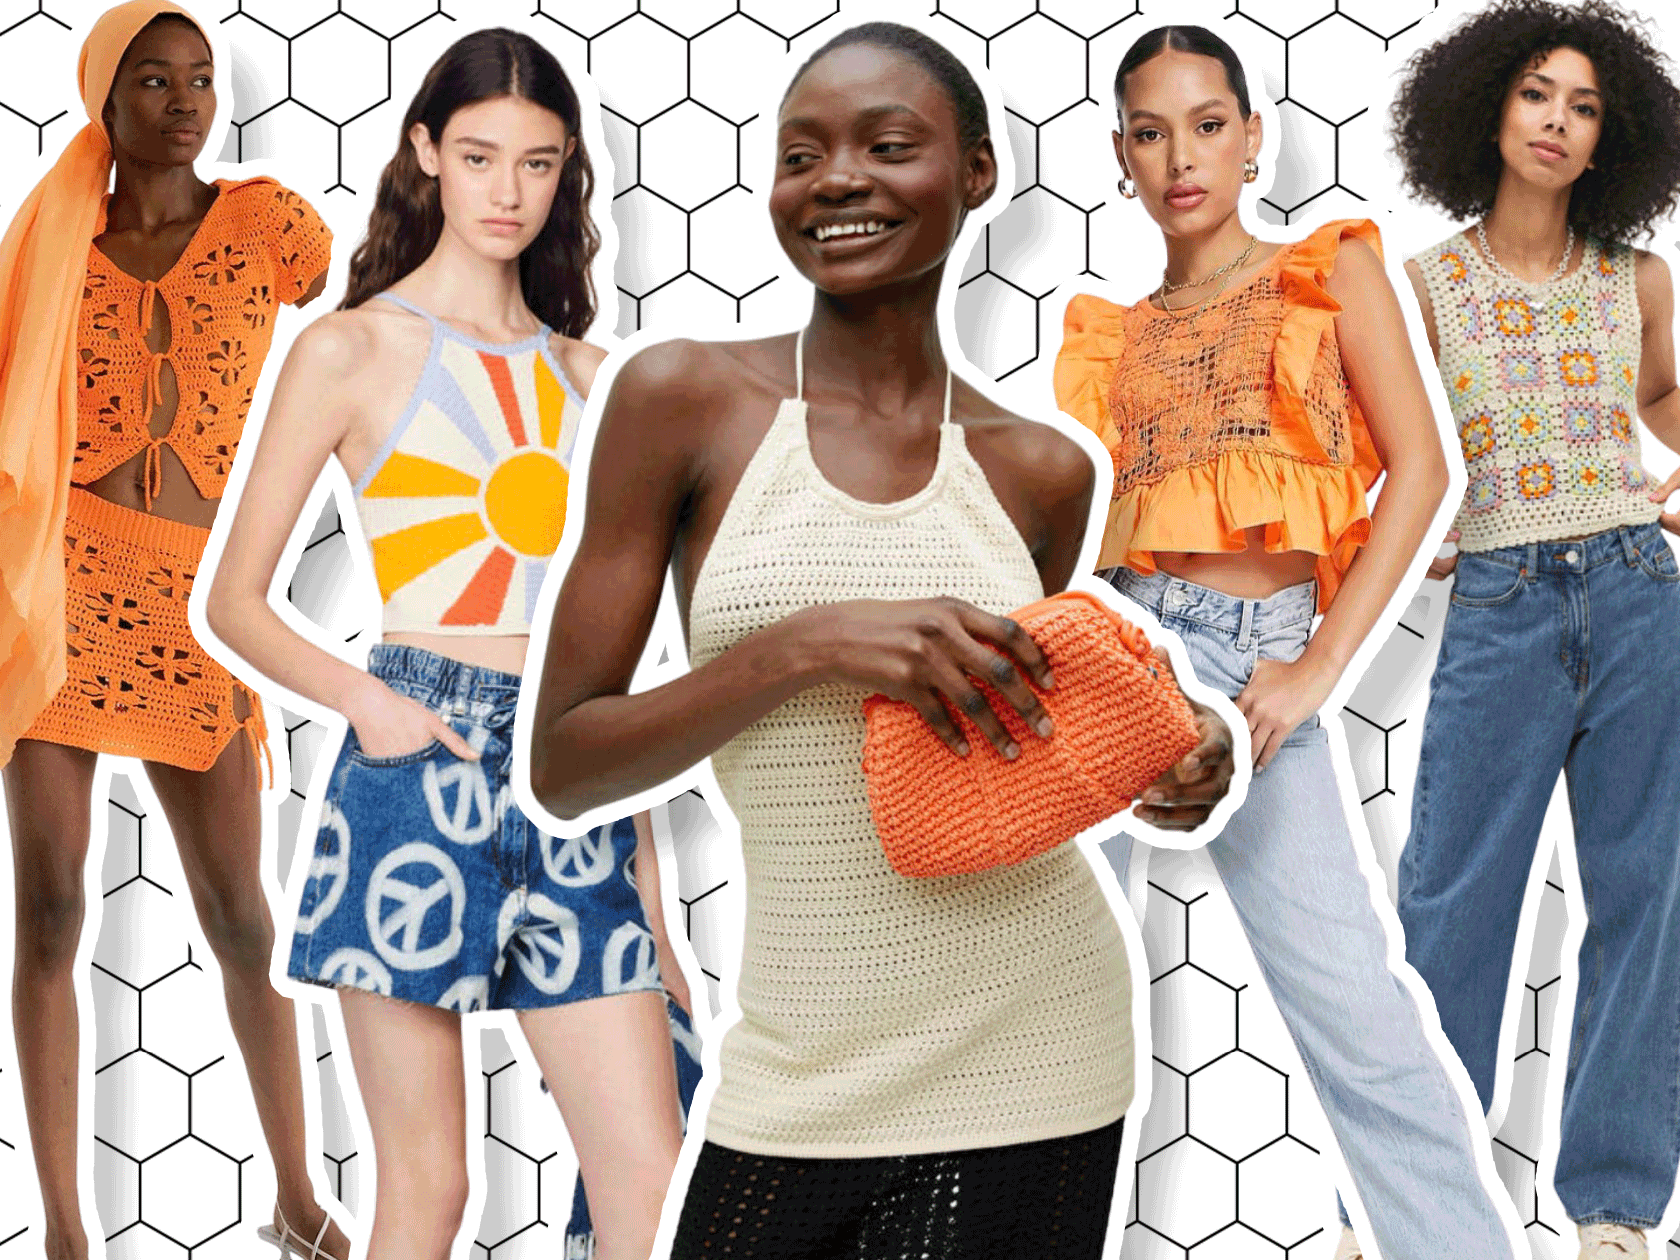 Crochet tops scream summer in the most stylish way possible – this is where to shop the best ones